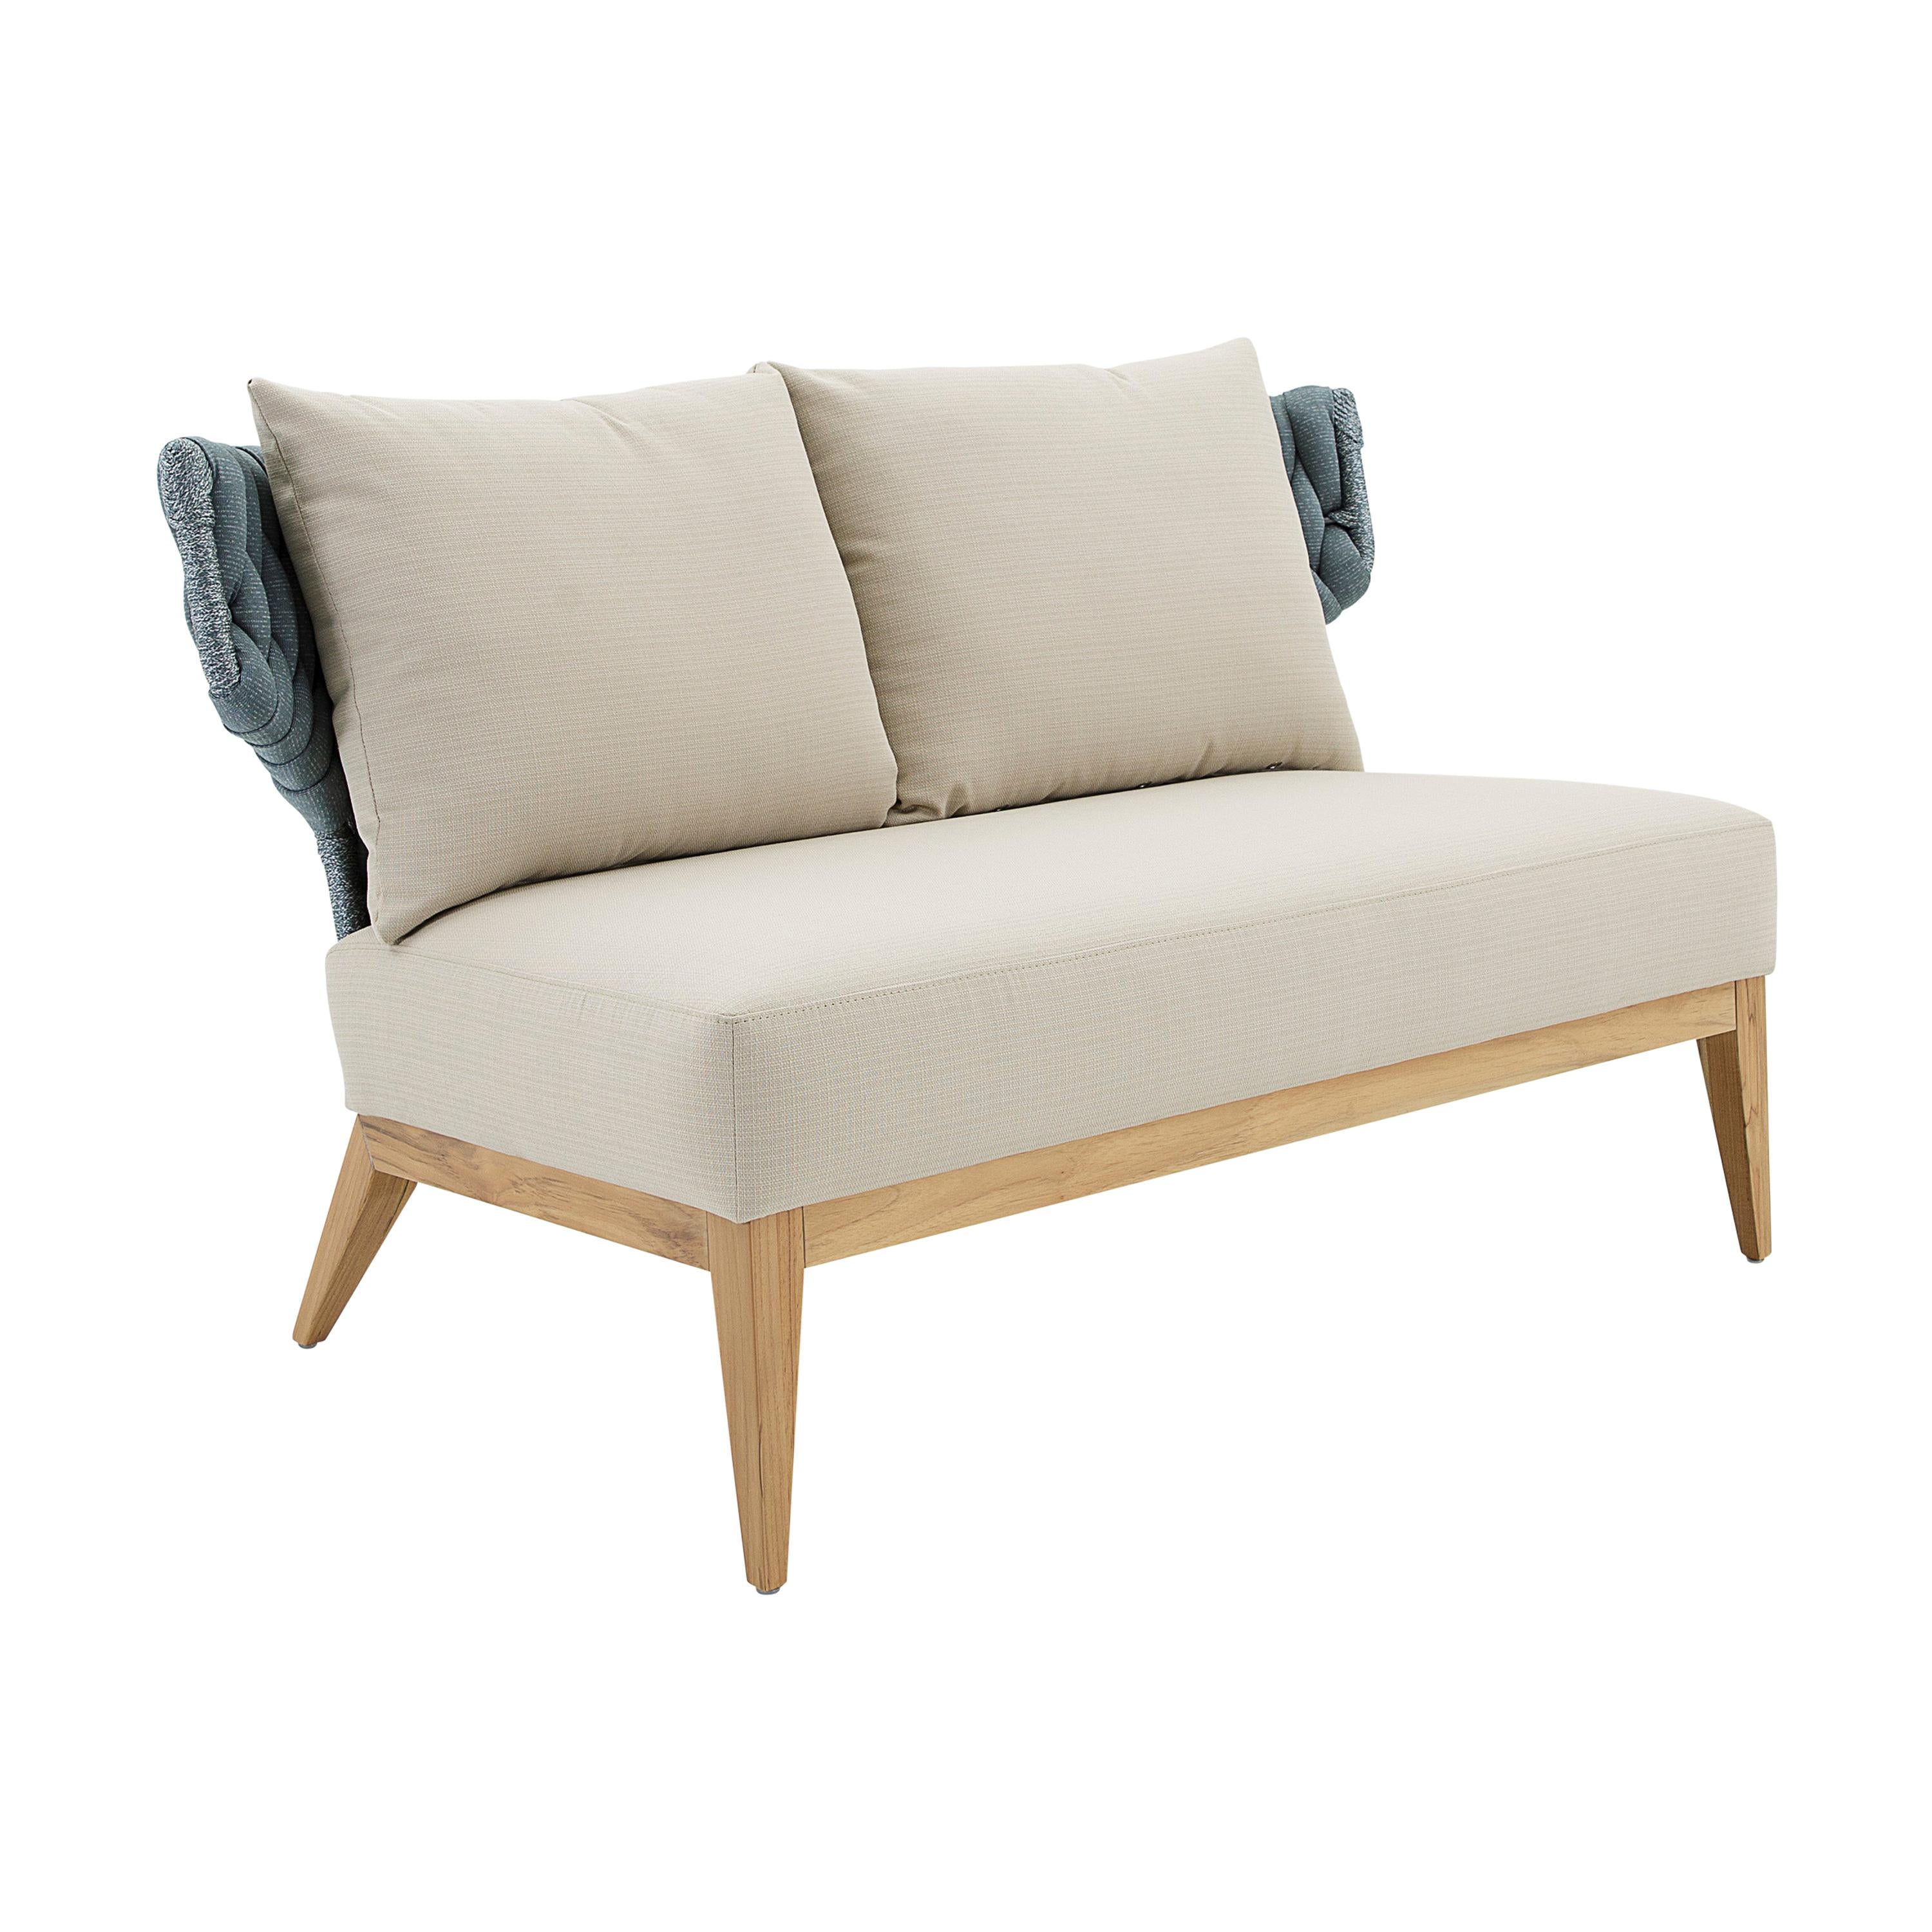 Beluga Outdoor Loveseat in Beige and Blue fabric and Teak wood For Sale